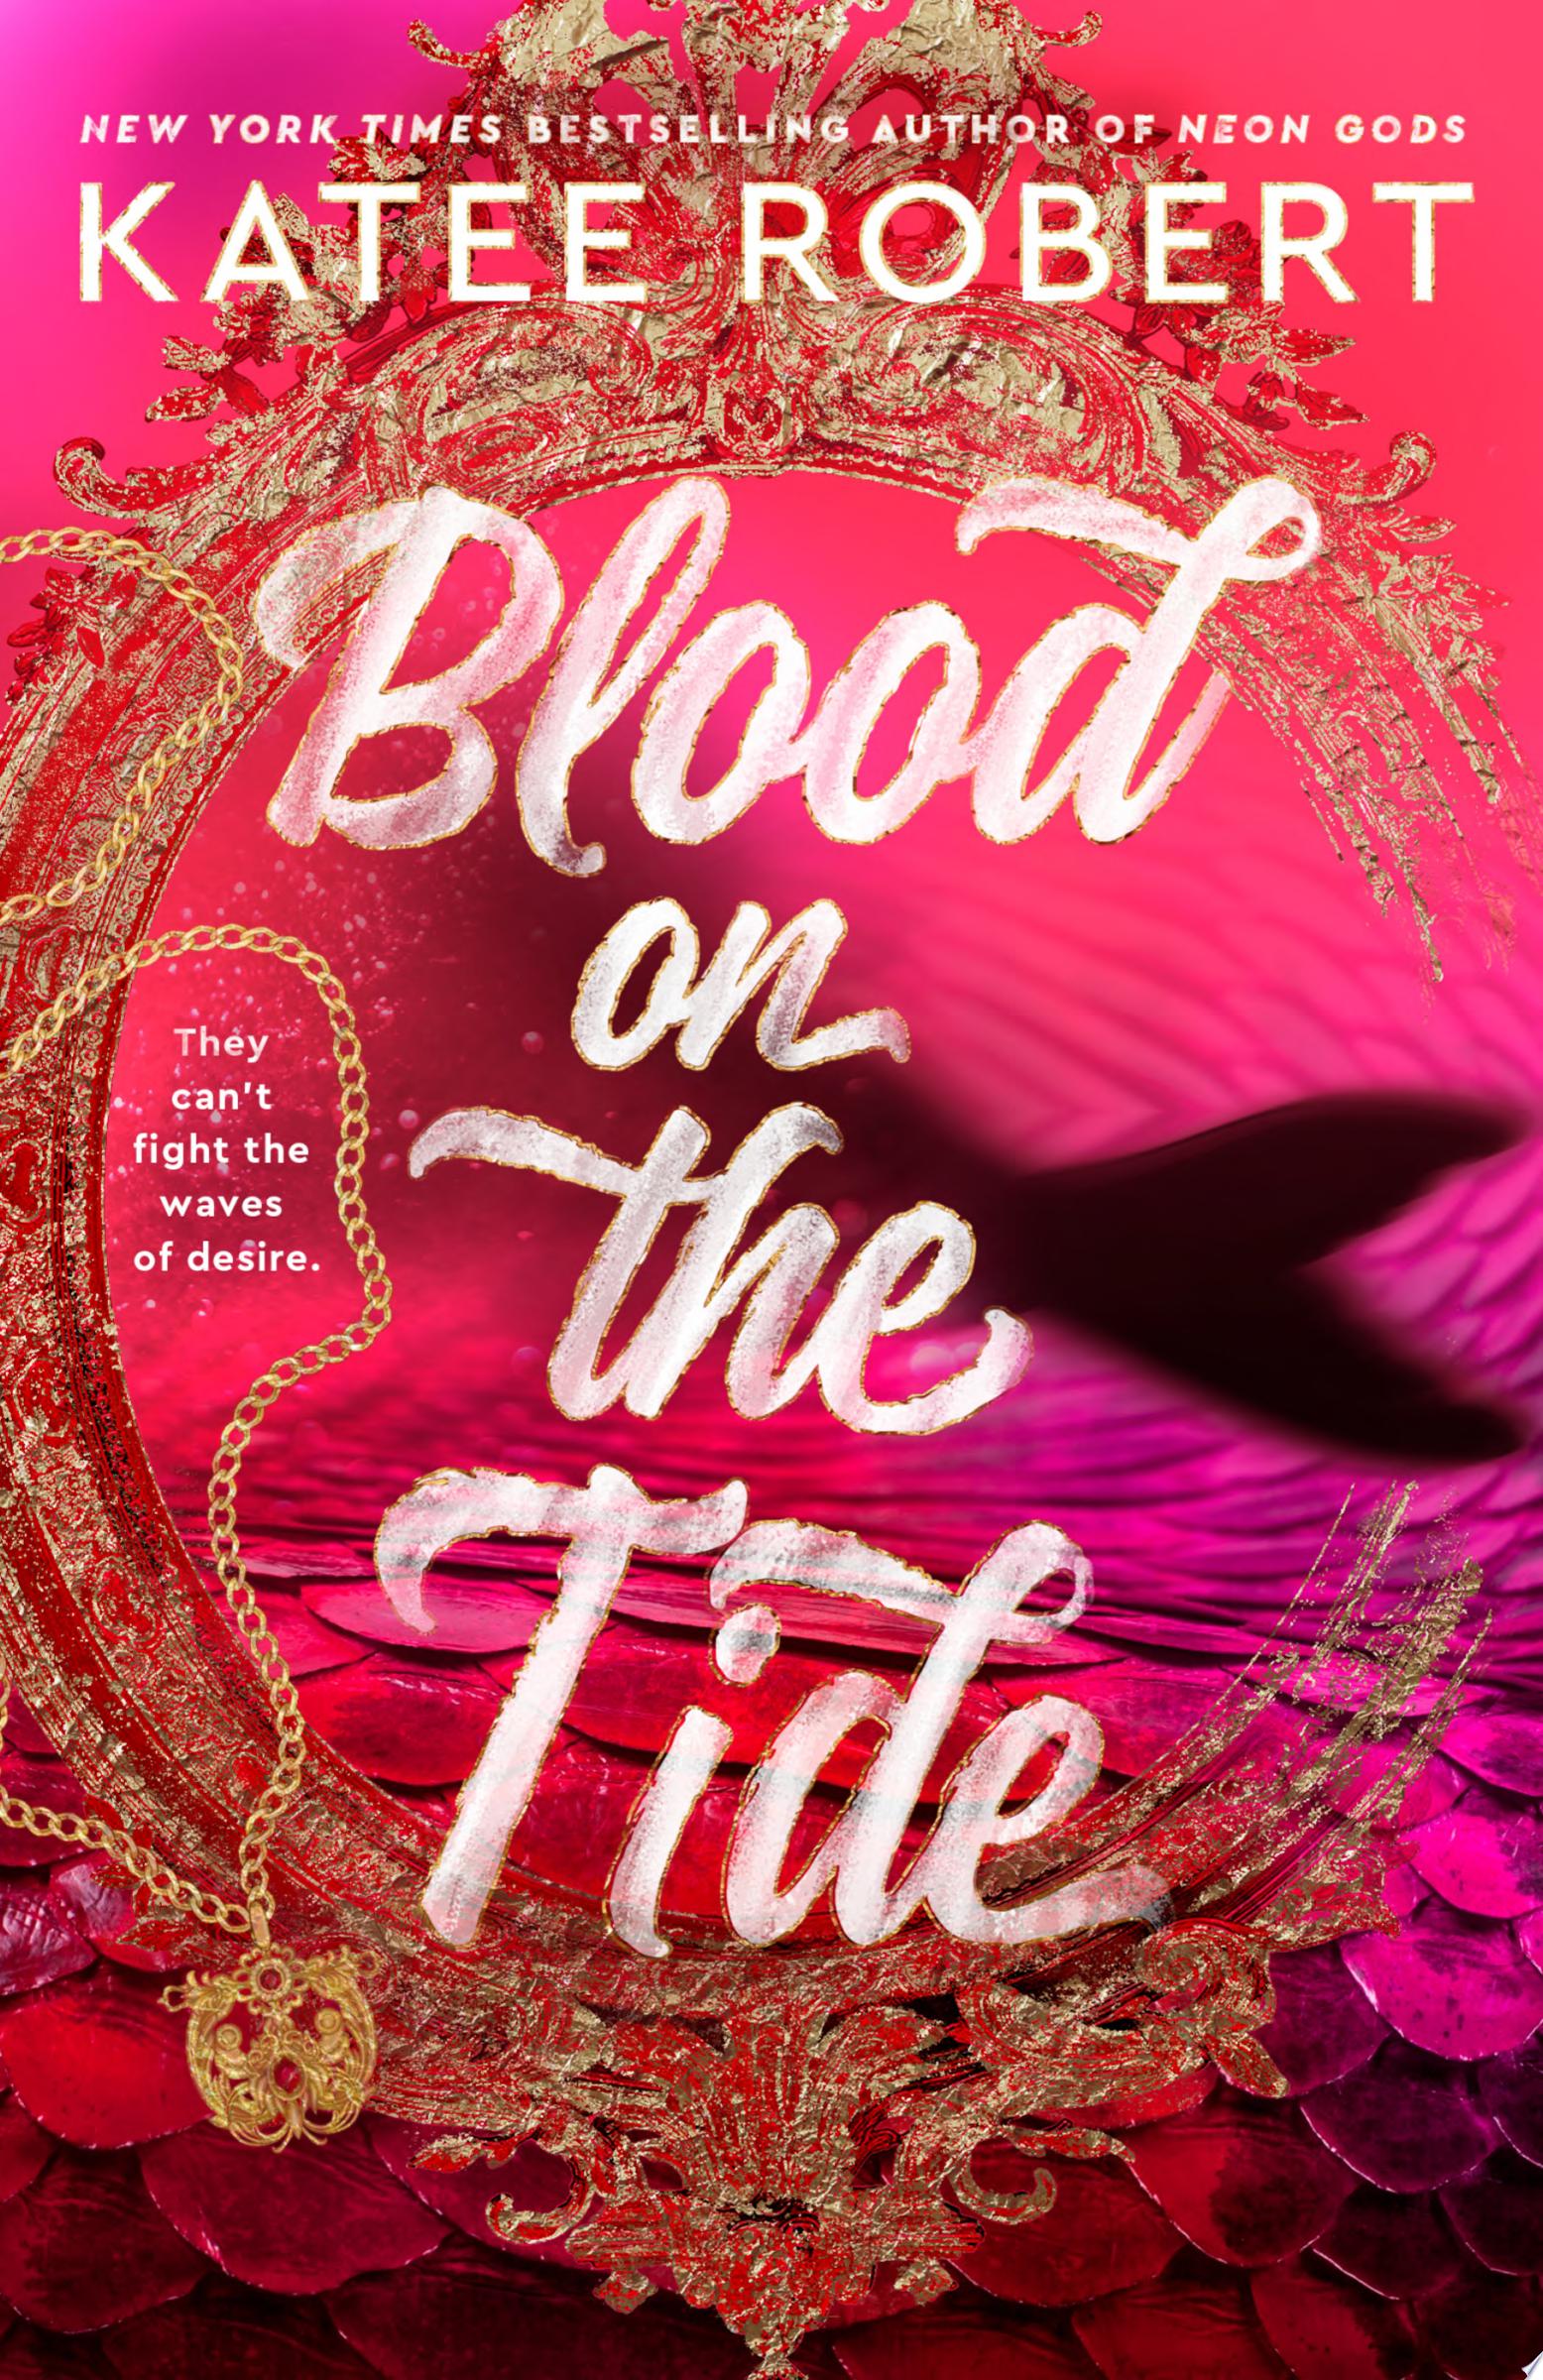 Image for "Blood on the Tide" by Katee Robert